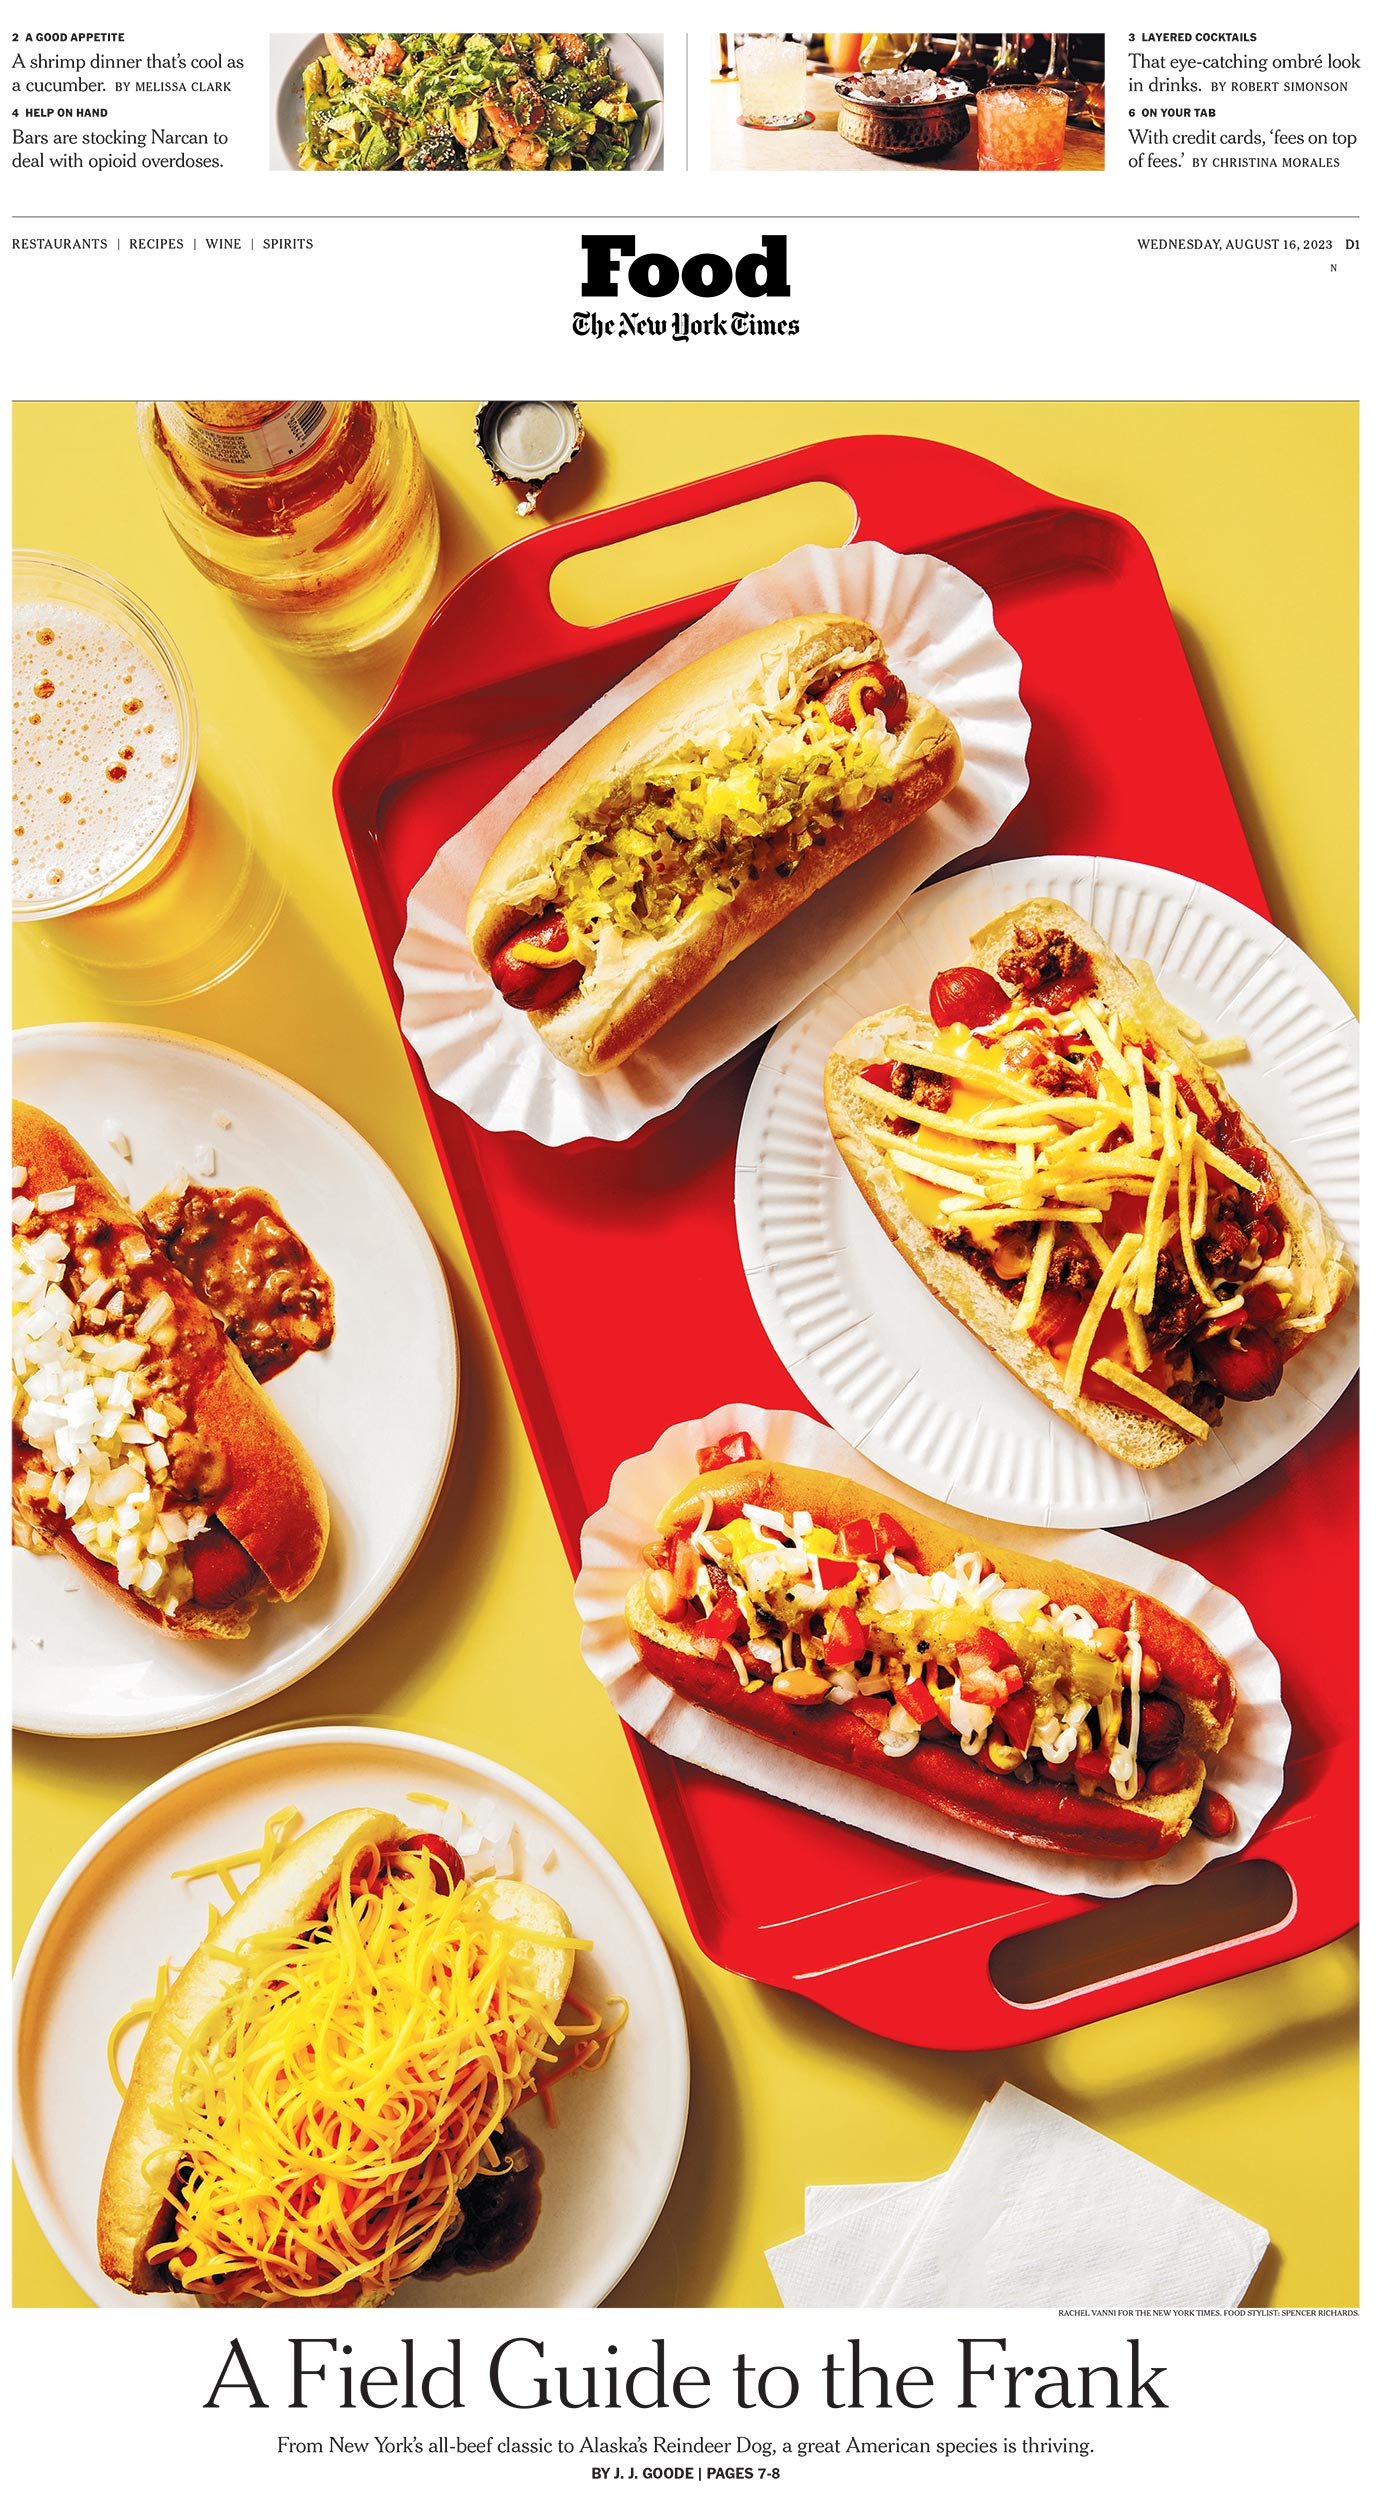 nyc-nj-food-editorial-photographer-nytimes-cooking-hot-dogs-cover.jpg